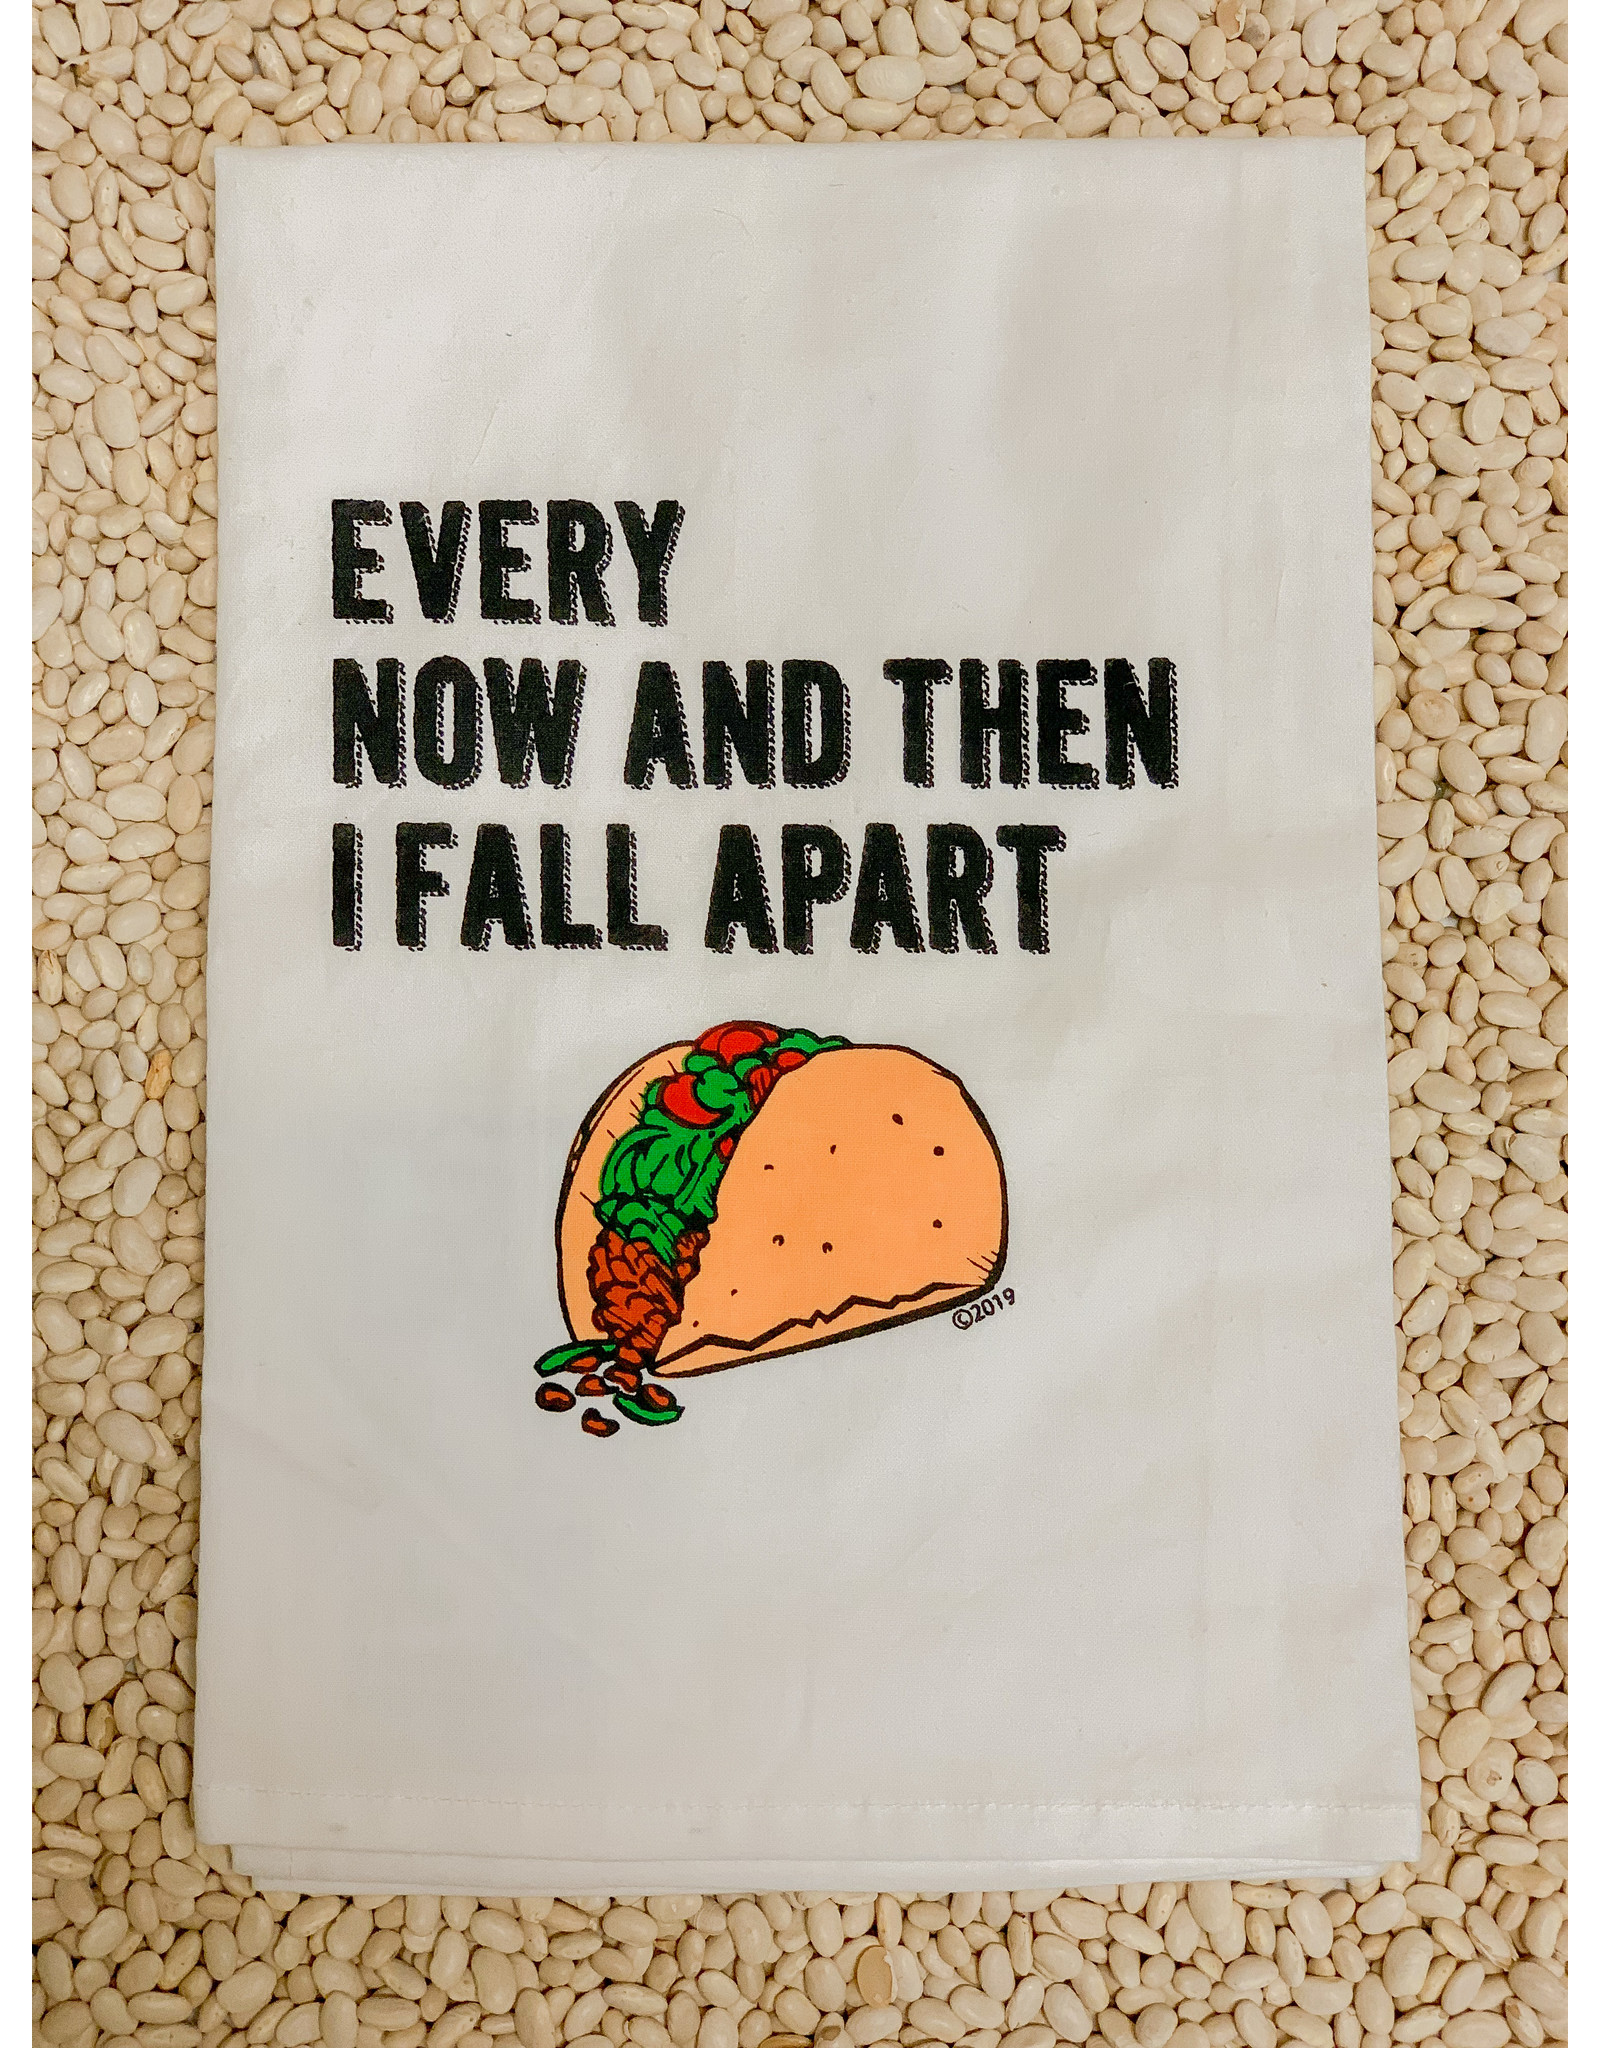 Twisted Wares Flour Sack Towel, Every Now and Then I Fall Apart